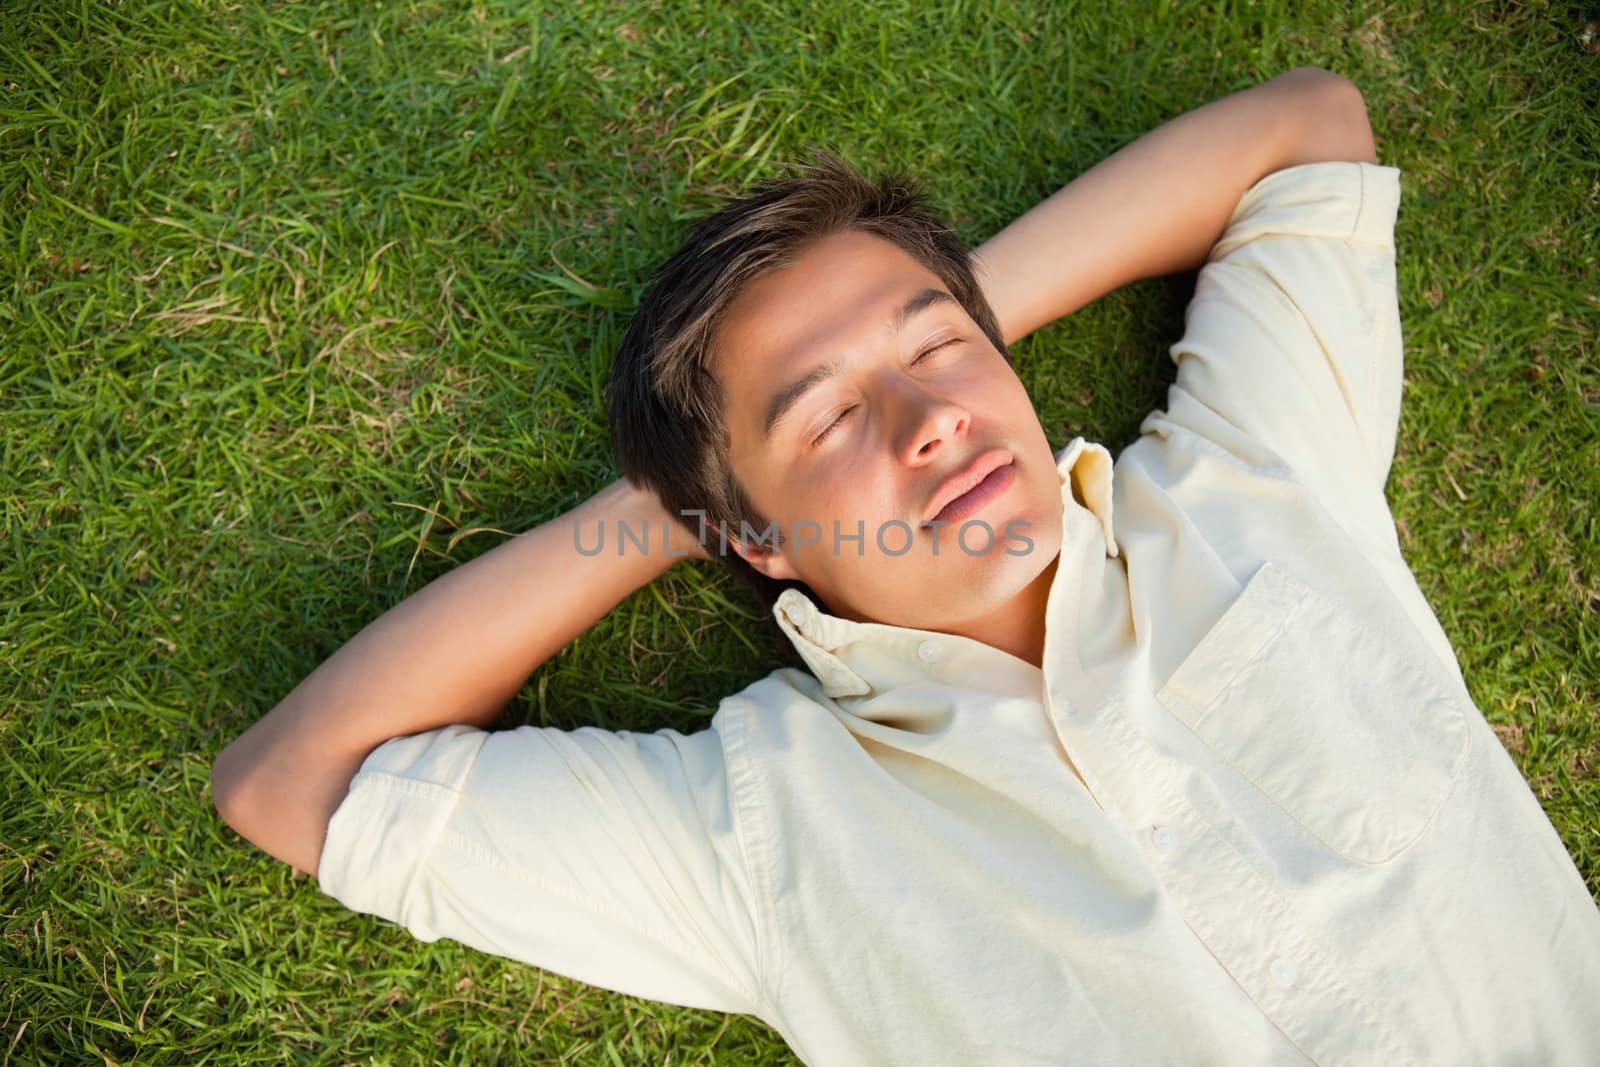 Man lying on the grass with his eyes closed and both hands resting behind his neck